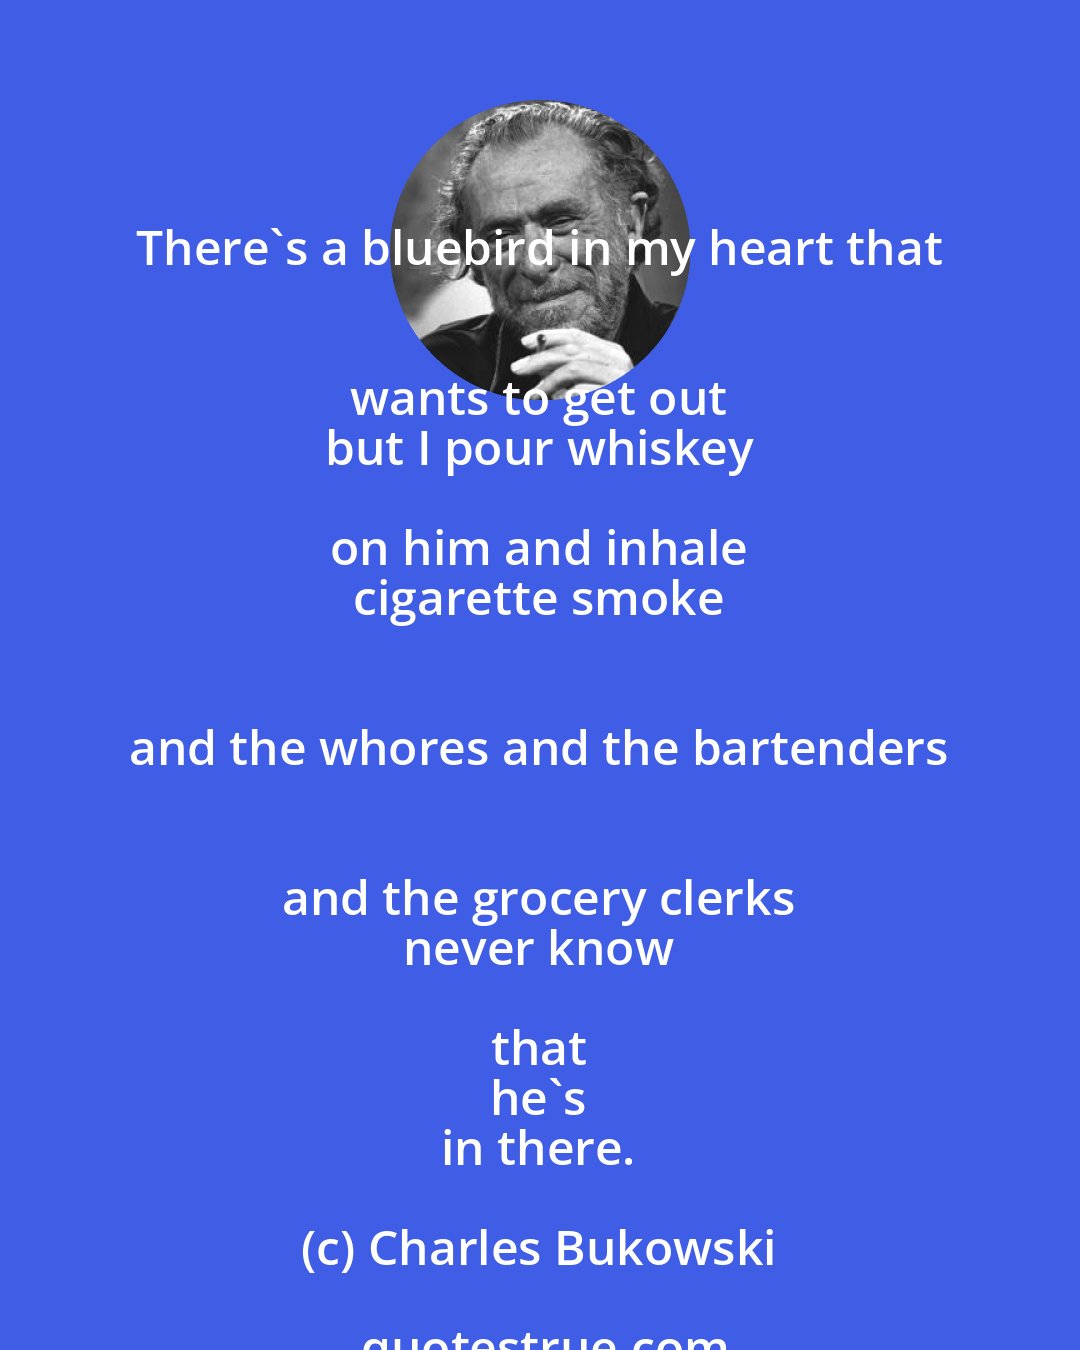 Charles Bukowski: There's a bluebird in my heart that 
 wants to get out 
 but I pour whiskey on him and inhale 
 cigarette smoke 
 and the whores and the bartenders 
 and the grocery clerks 
 never know that 
 he's 
 in there.